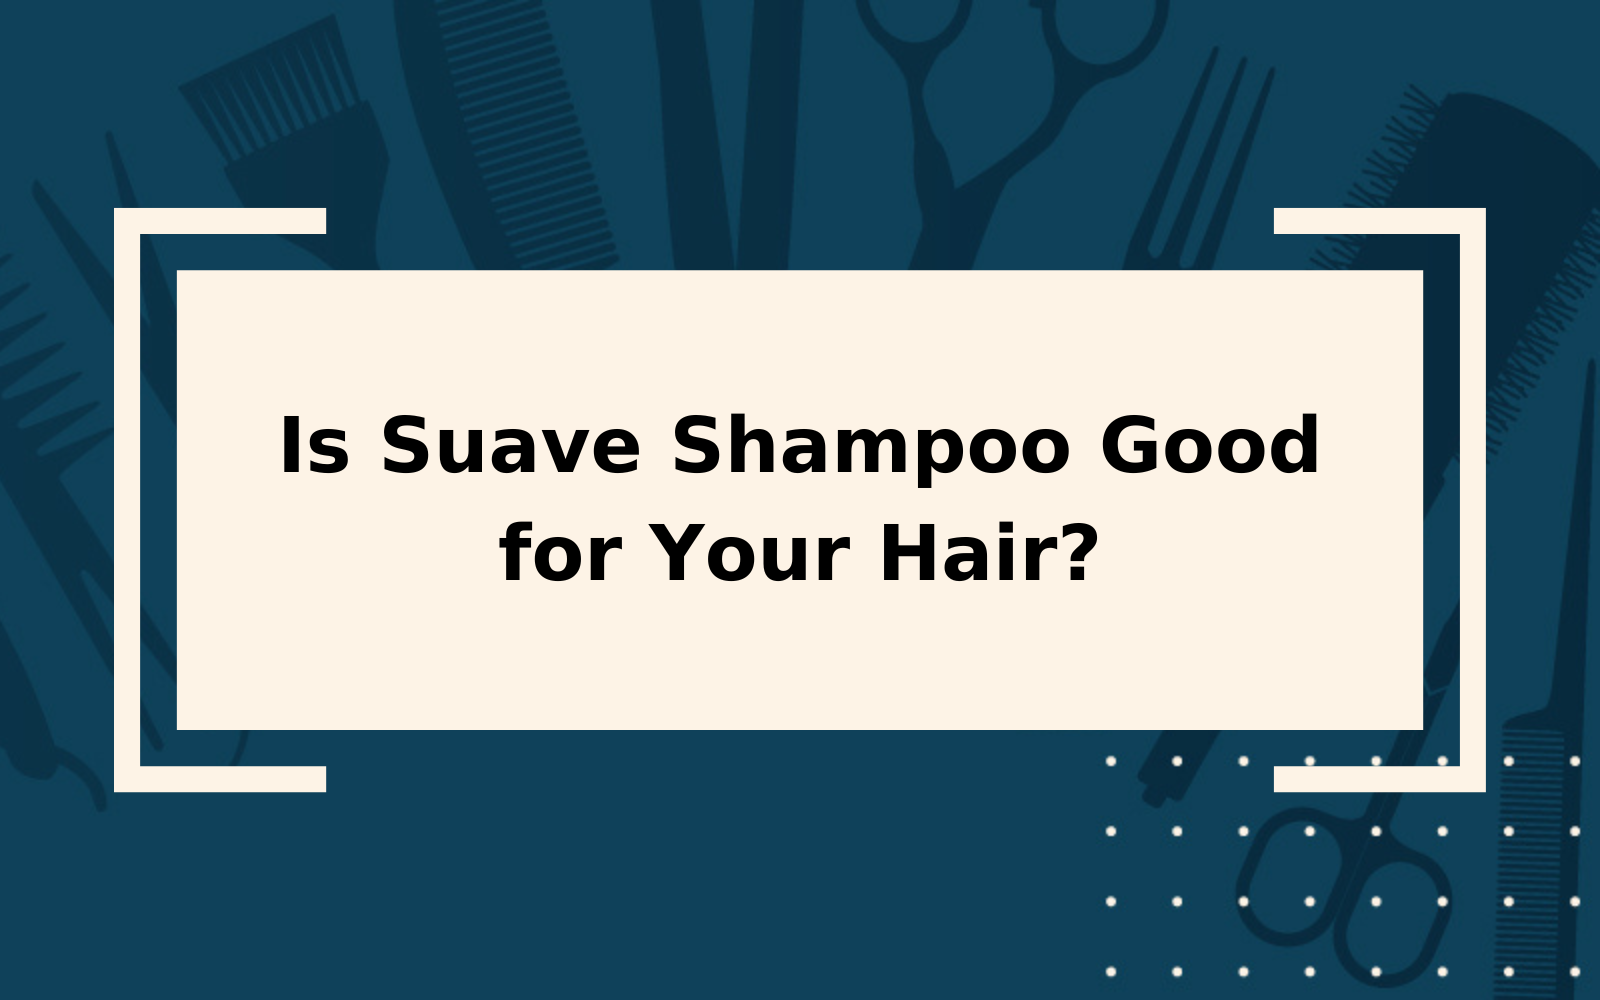 Is Suave Shampoo Good for Your Hair? | Yes It Is!